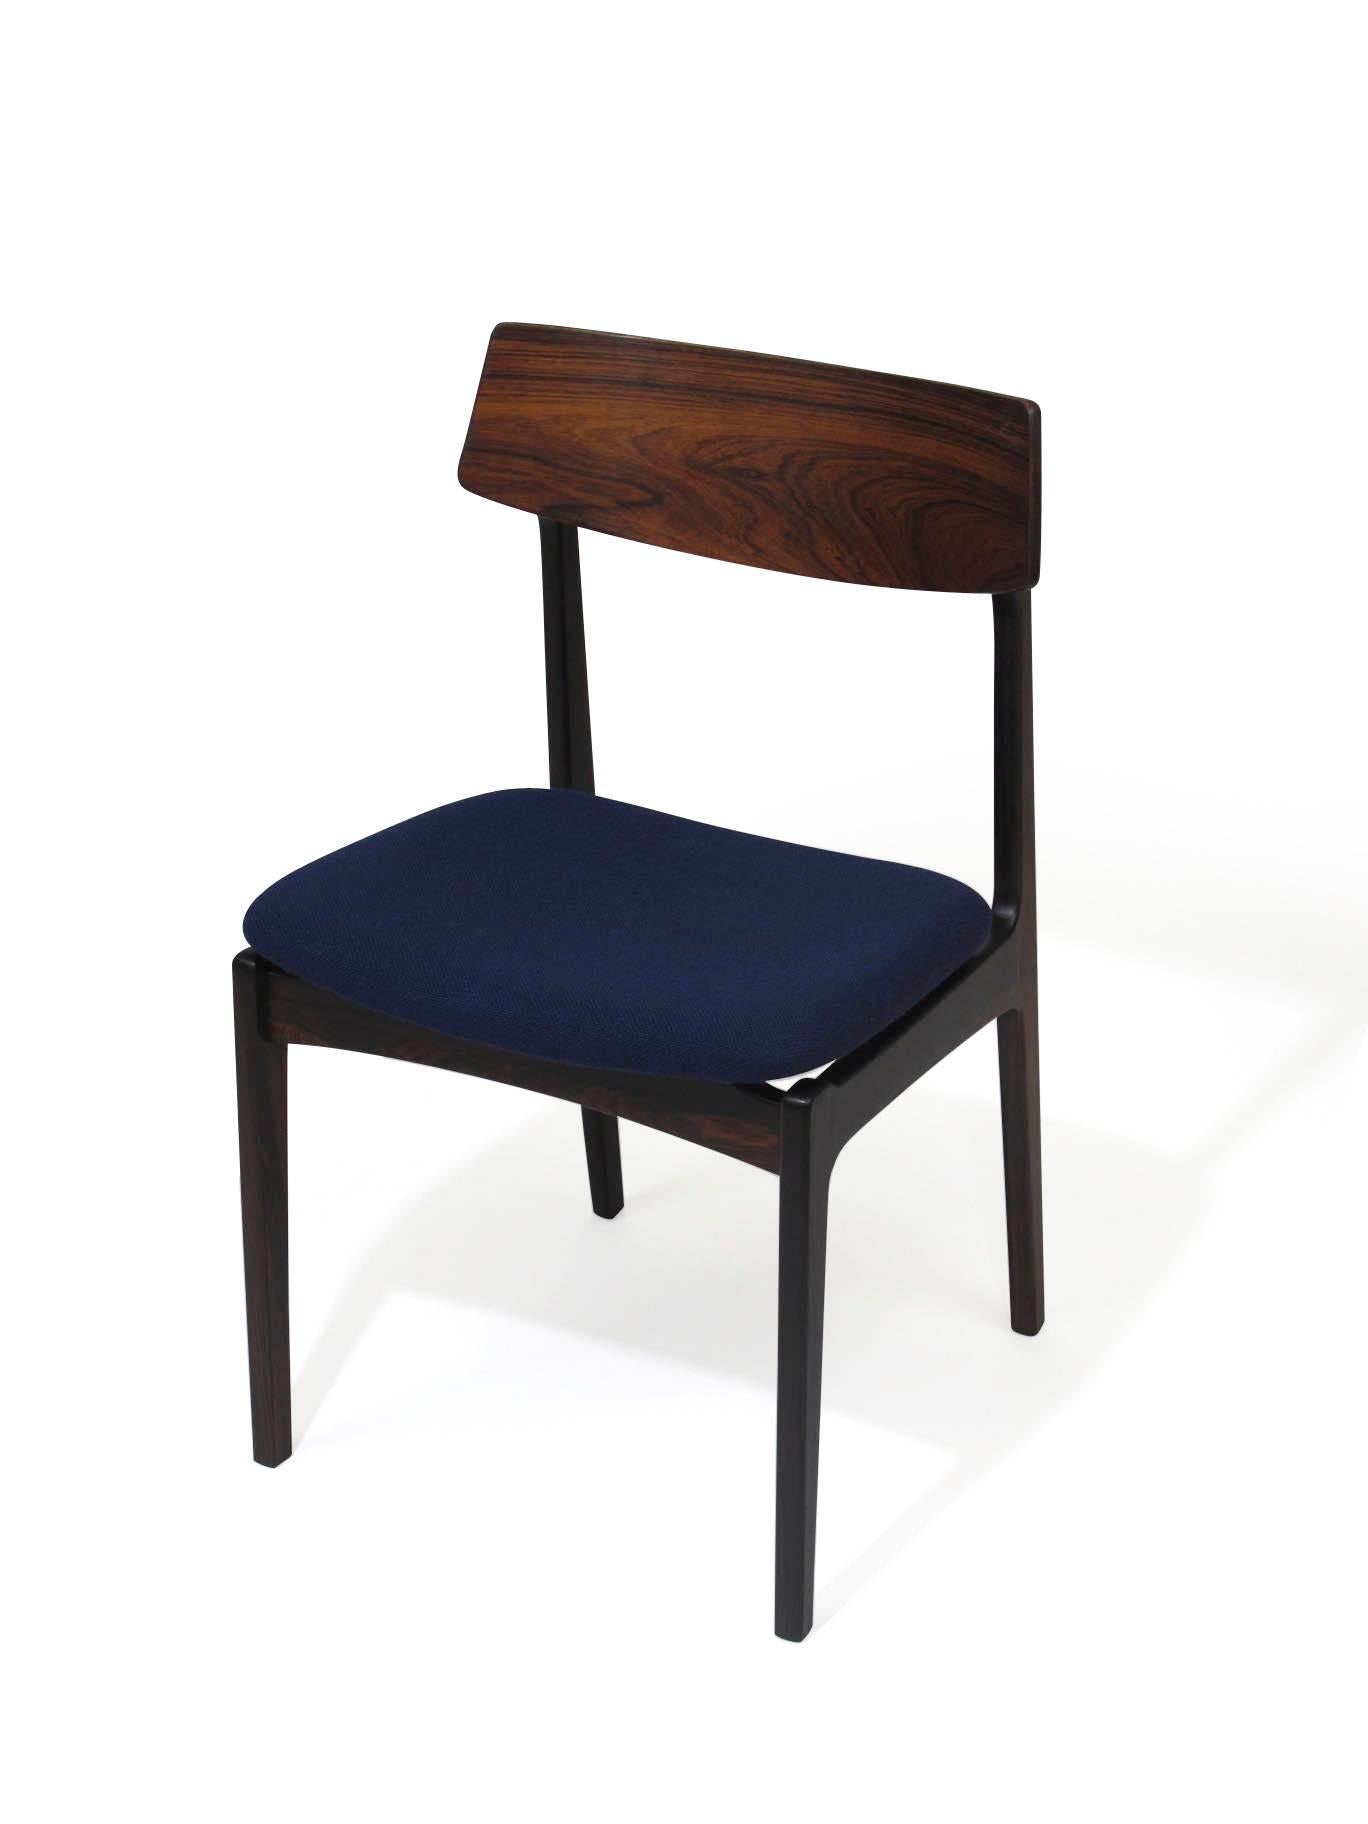 Set of four sturdy rosewood dining chairs with curved backs and newly upholstered in navy Danish wool.